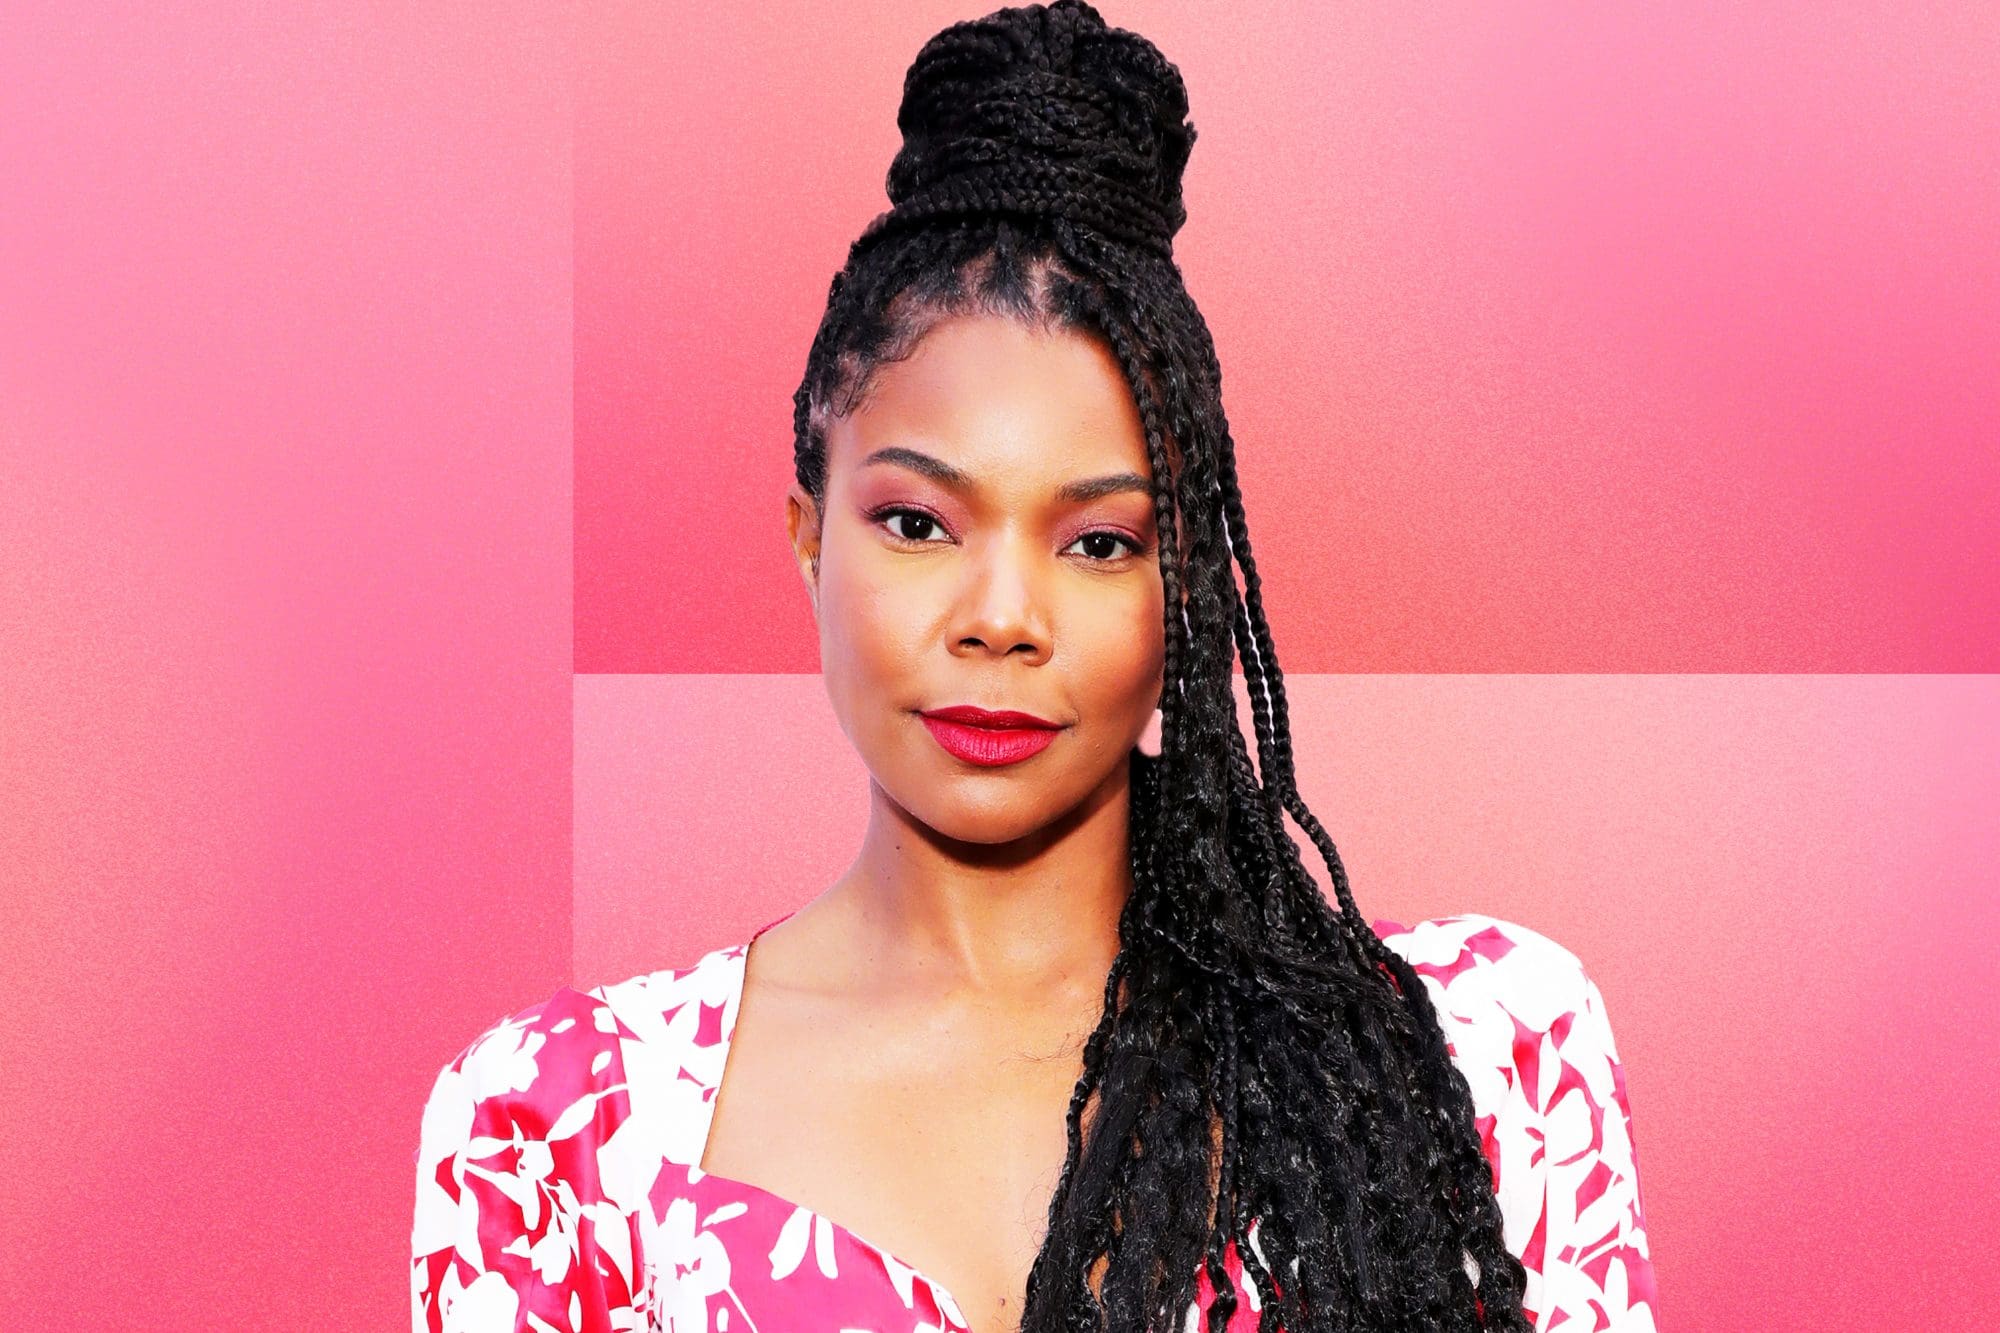 ”gabrielle-union-praised-a-special-makeup-artist-see-her-clip-and-message”